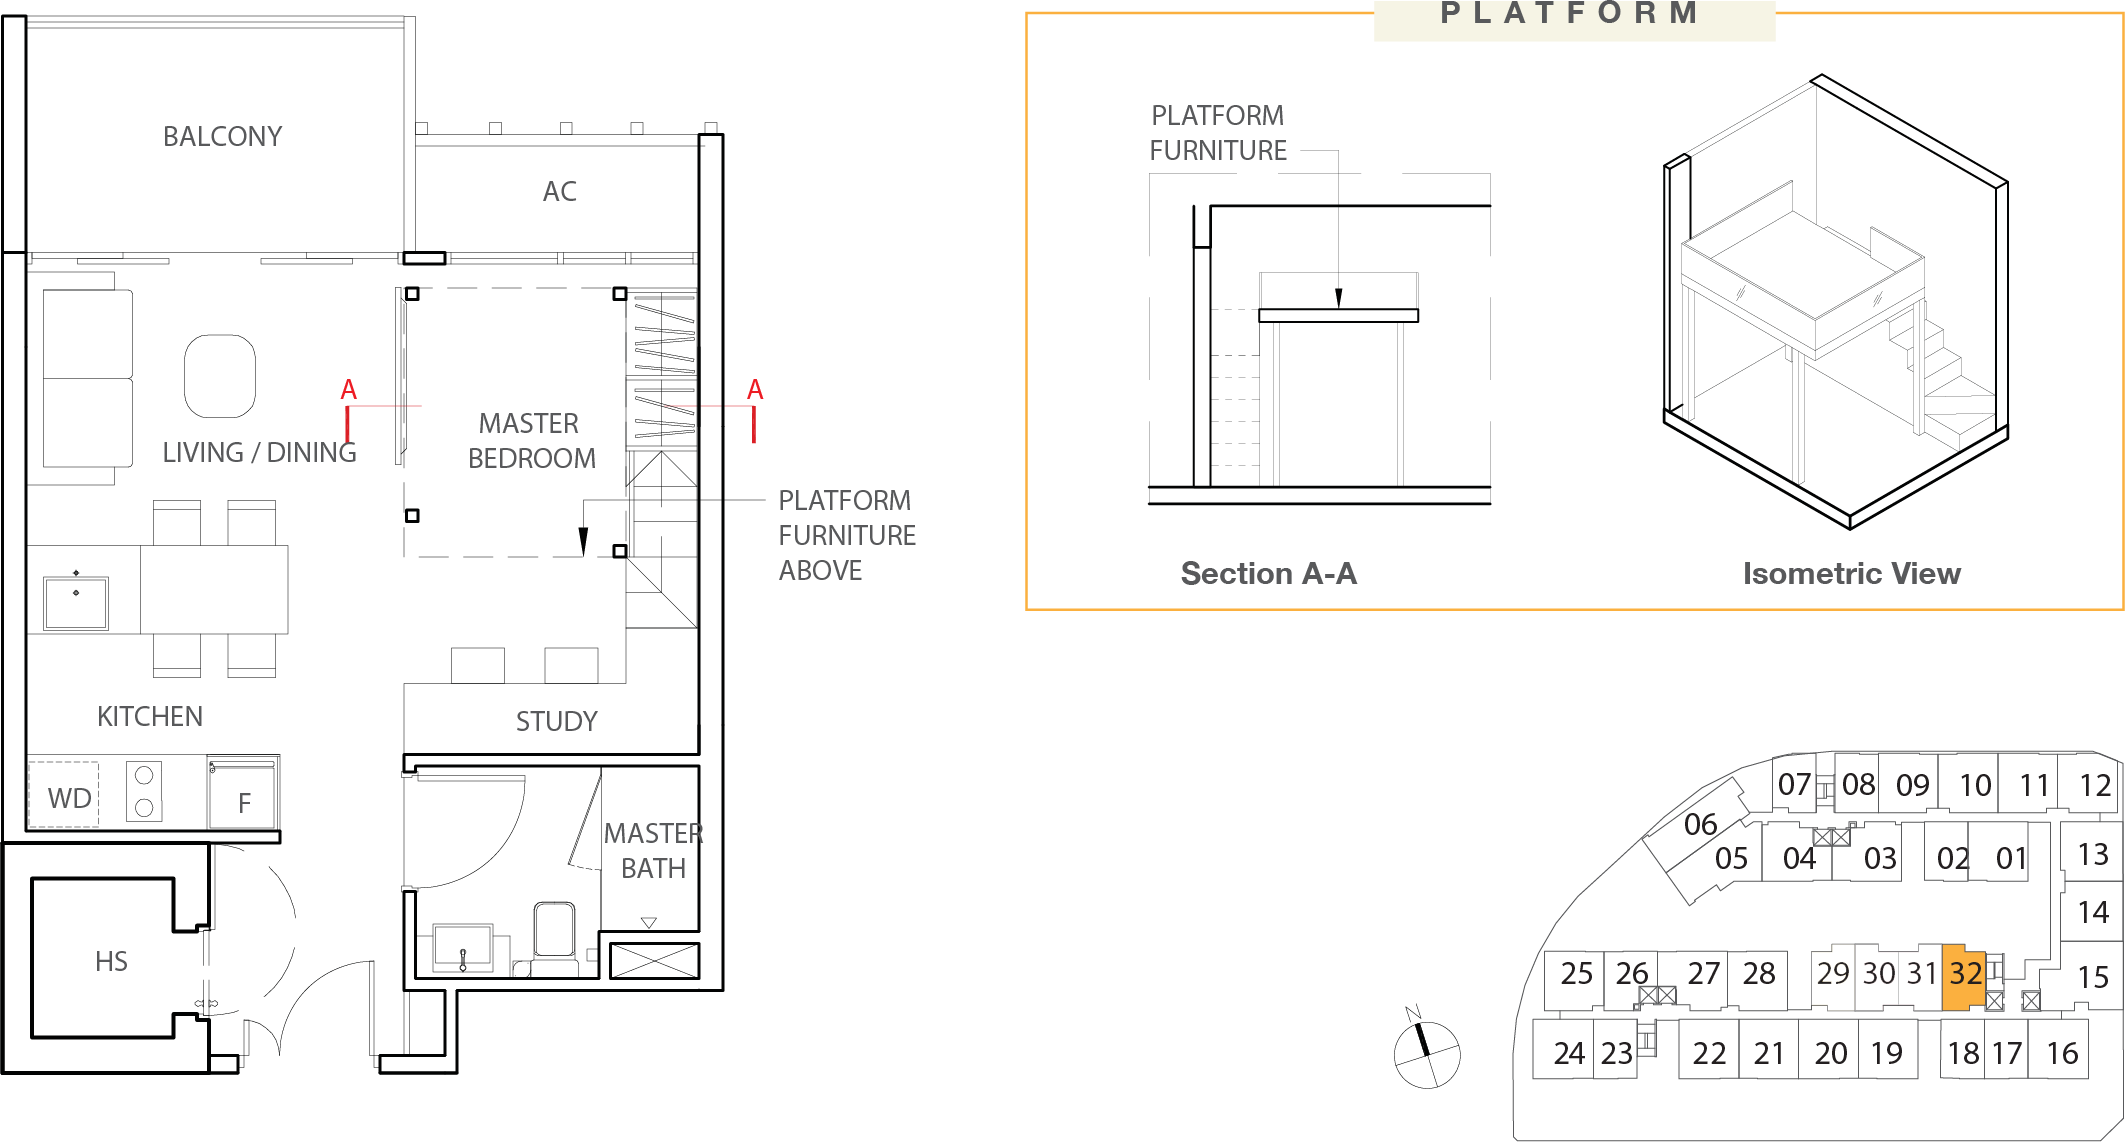 Floor Plan for Residential Type A2-b